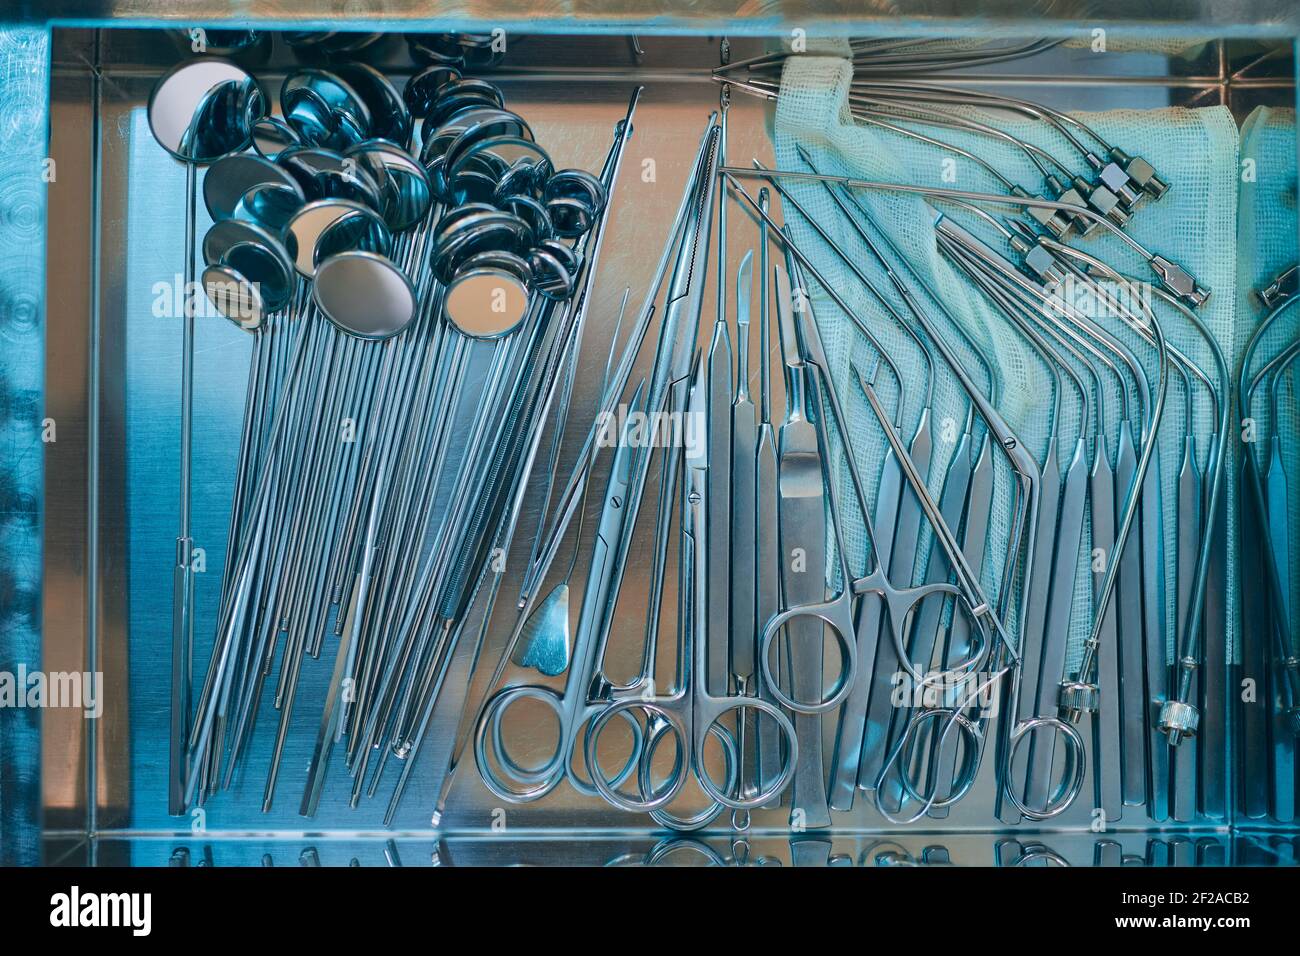 Ear, Nose and Throat doctor instruments. Still life of tools on metal tray. Stock Photo